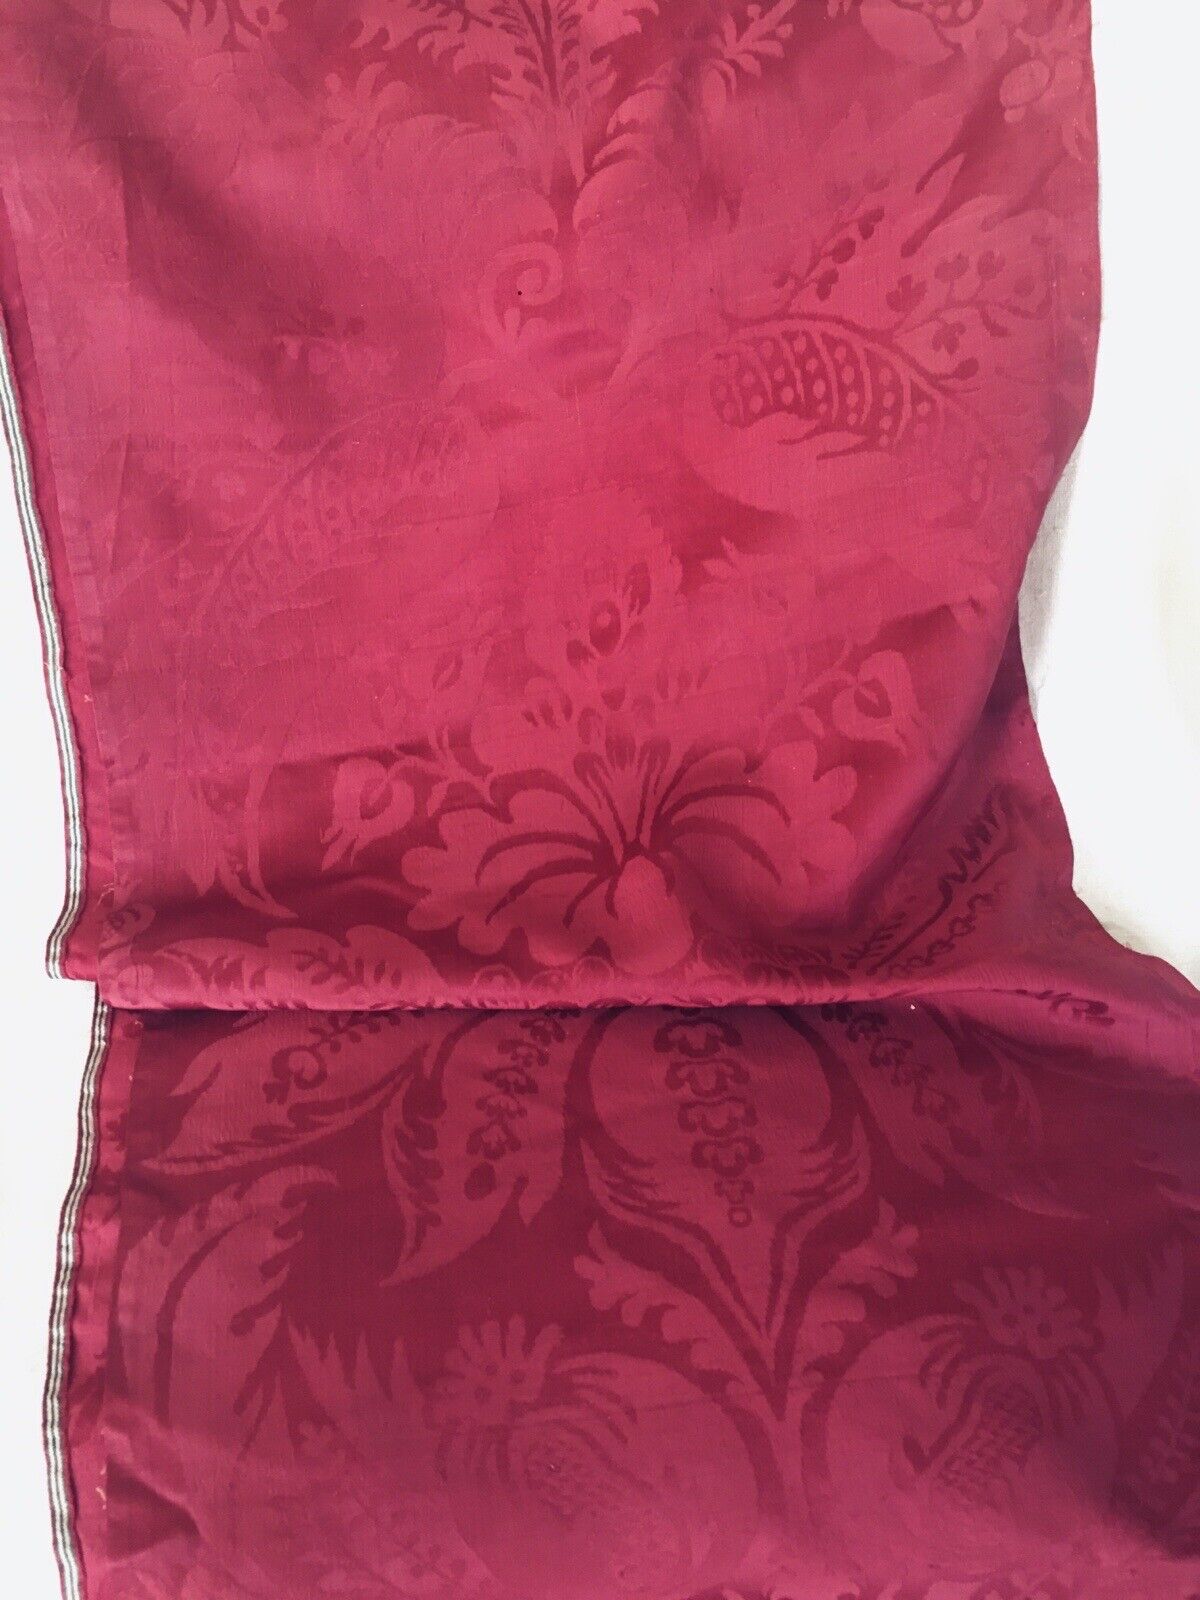 Antique 19th century or earlier French Red Silk Damask Fabric ~ Long Panel